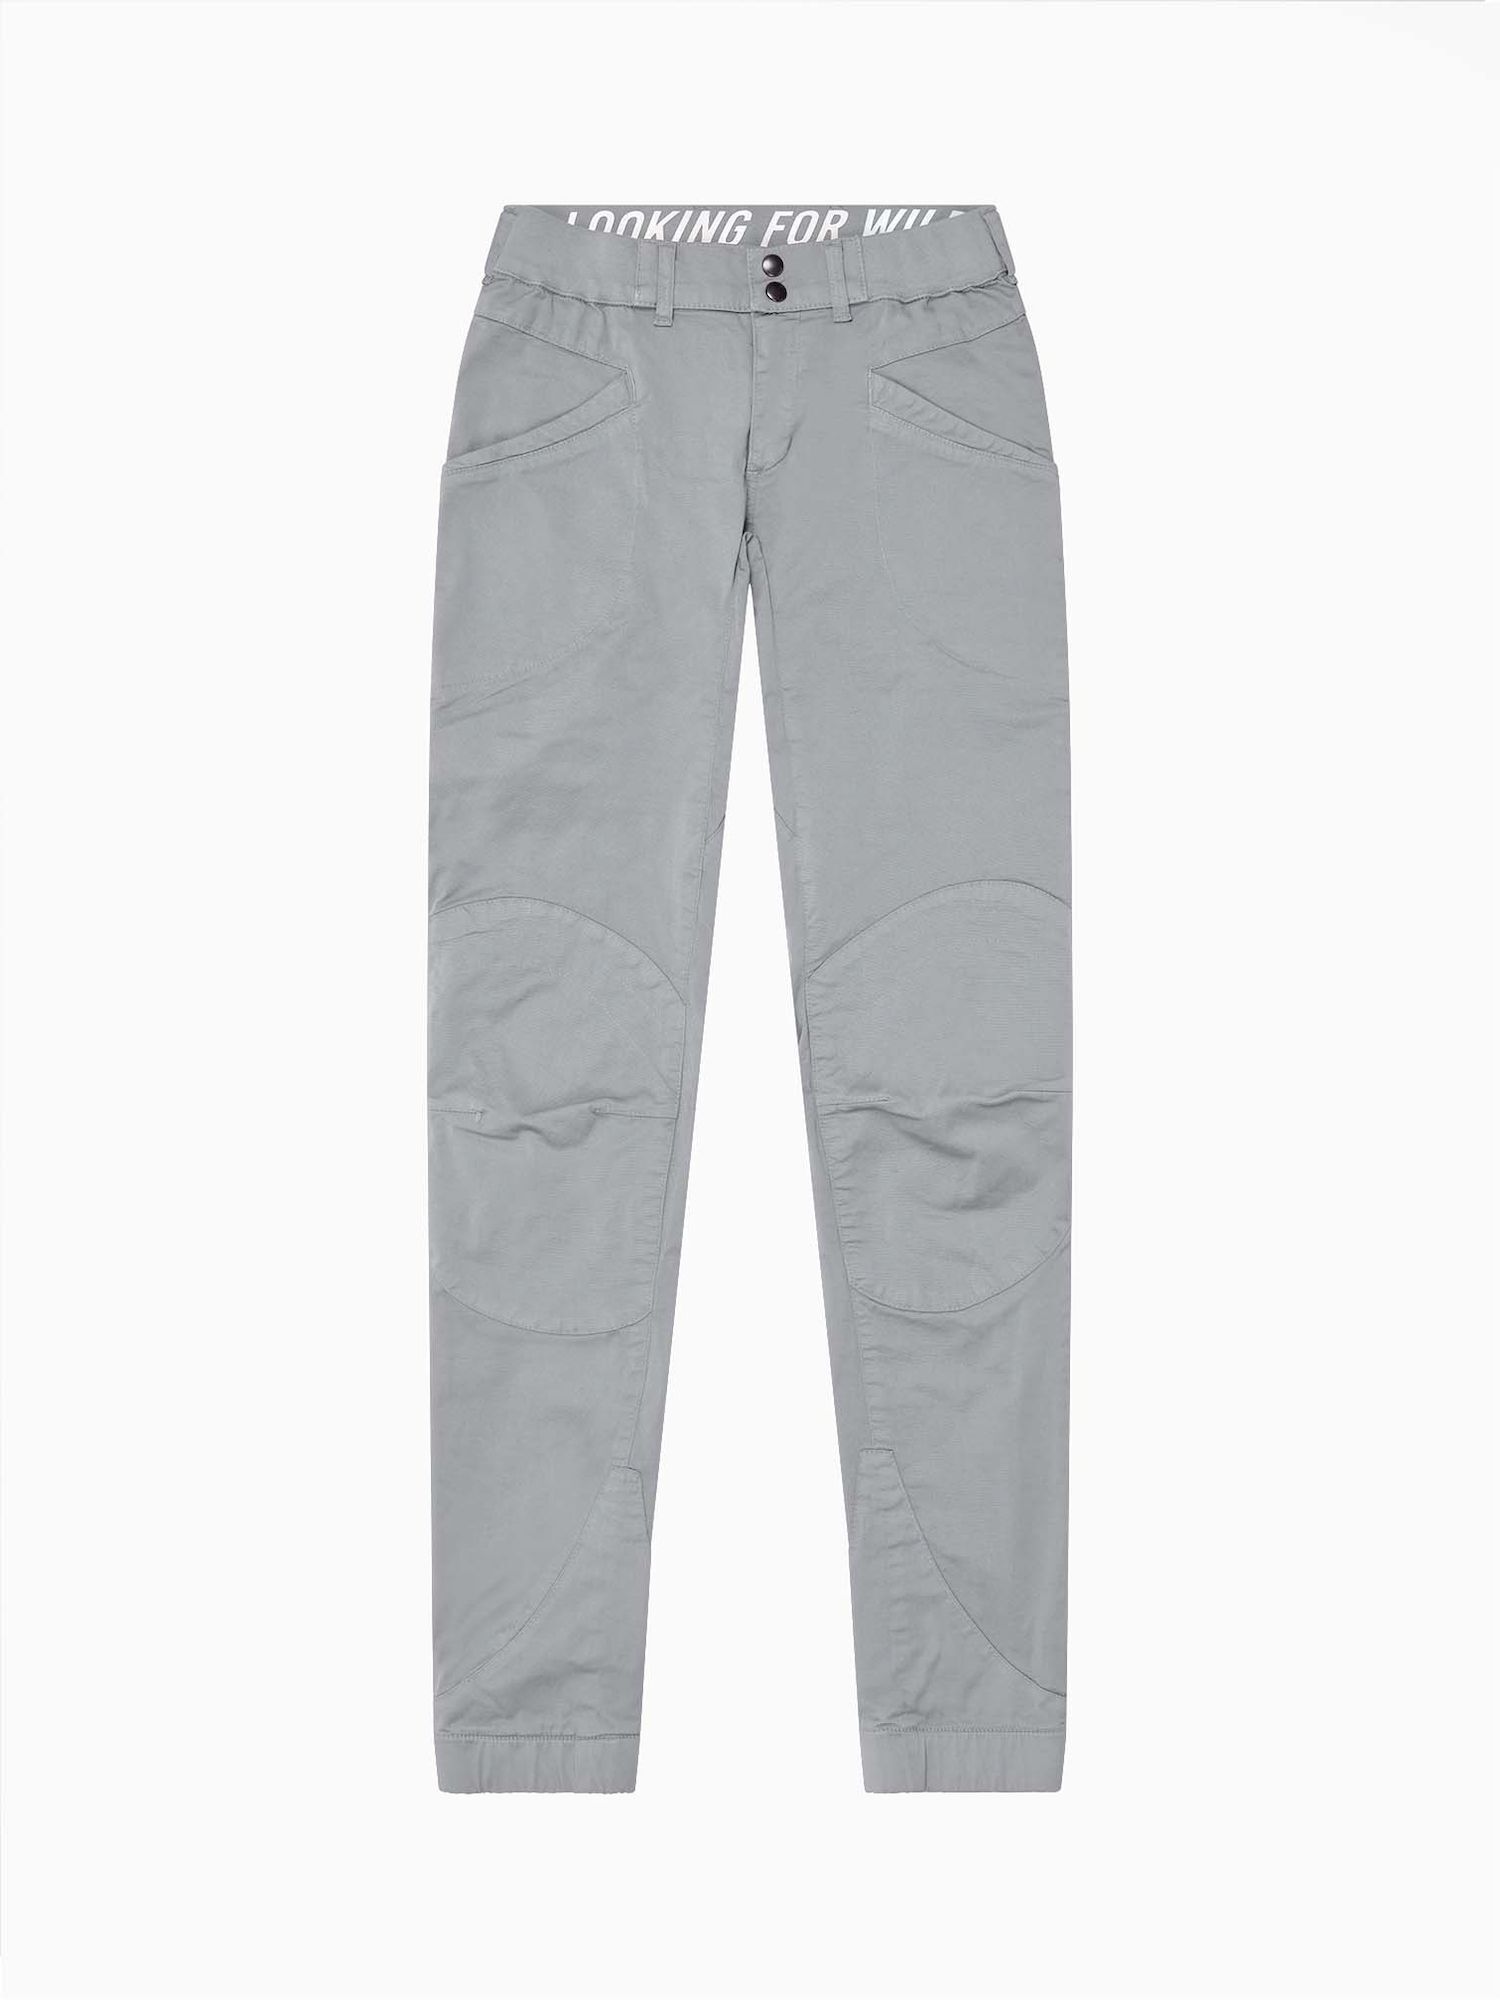 Looking For Wild Laila Peak Pant - Climbing trousers - Women's